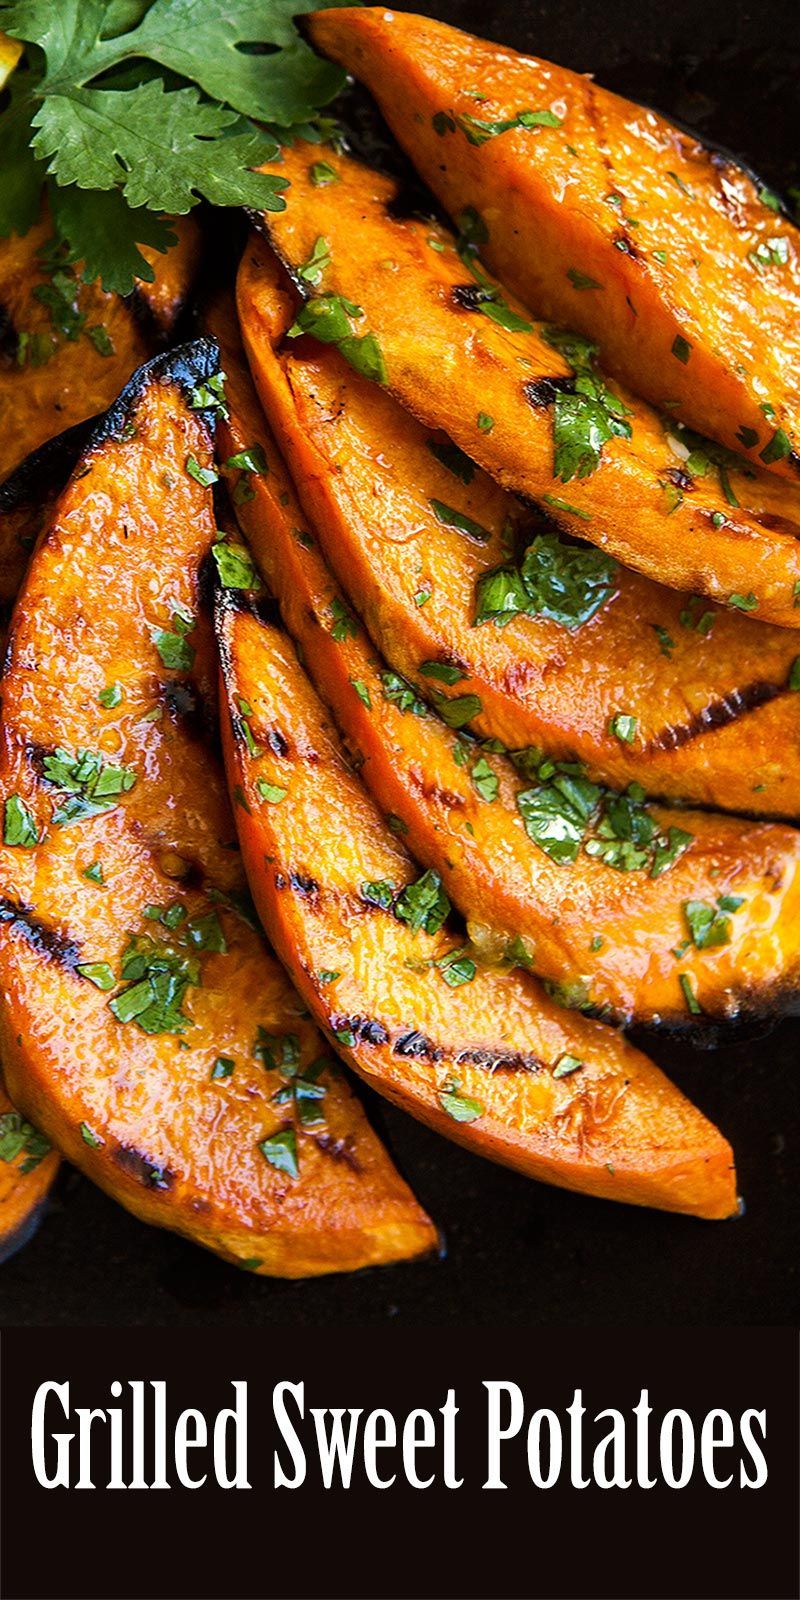 Grilled sweet potatoes! Slices of sweet potatoes grilled and slathered with a cilantro-lime dressing.